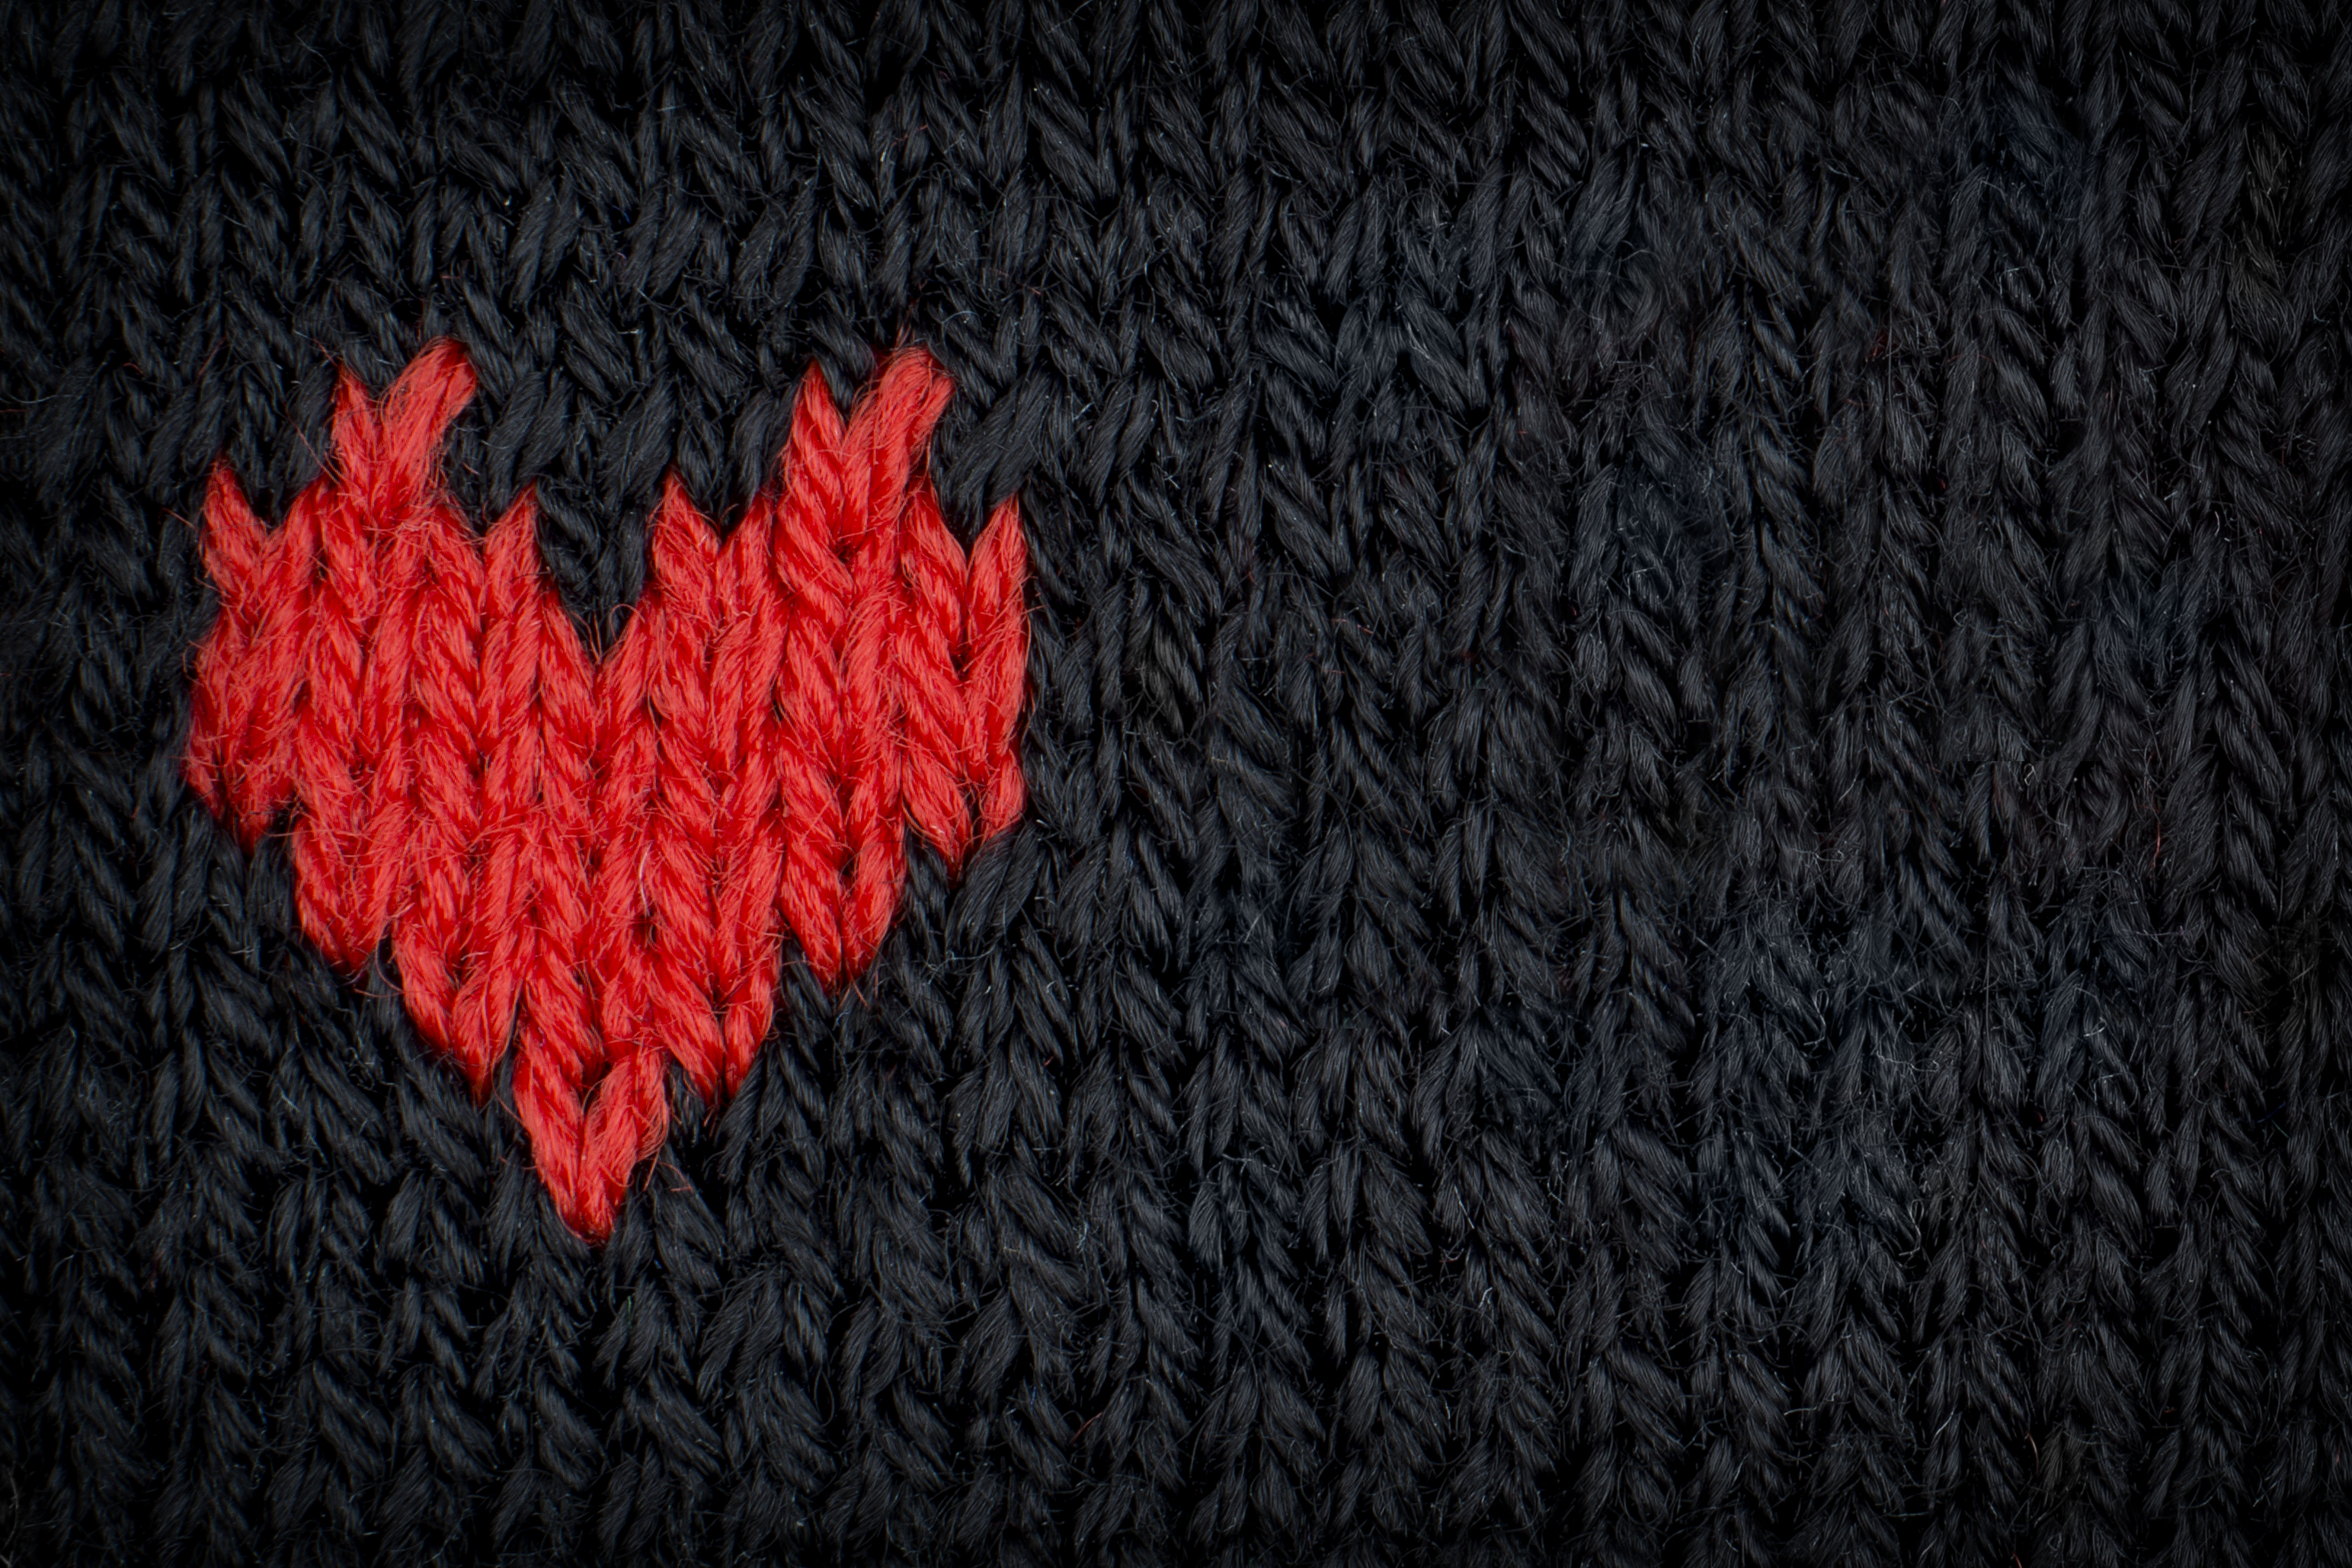 Rivalry Knitting Patterns The Power Of Ravelrys Stance Against White Supremacy Reaches Beyond